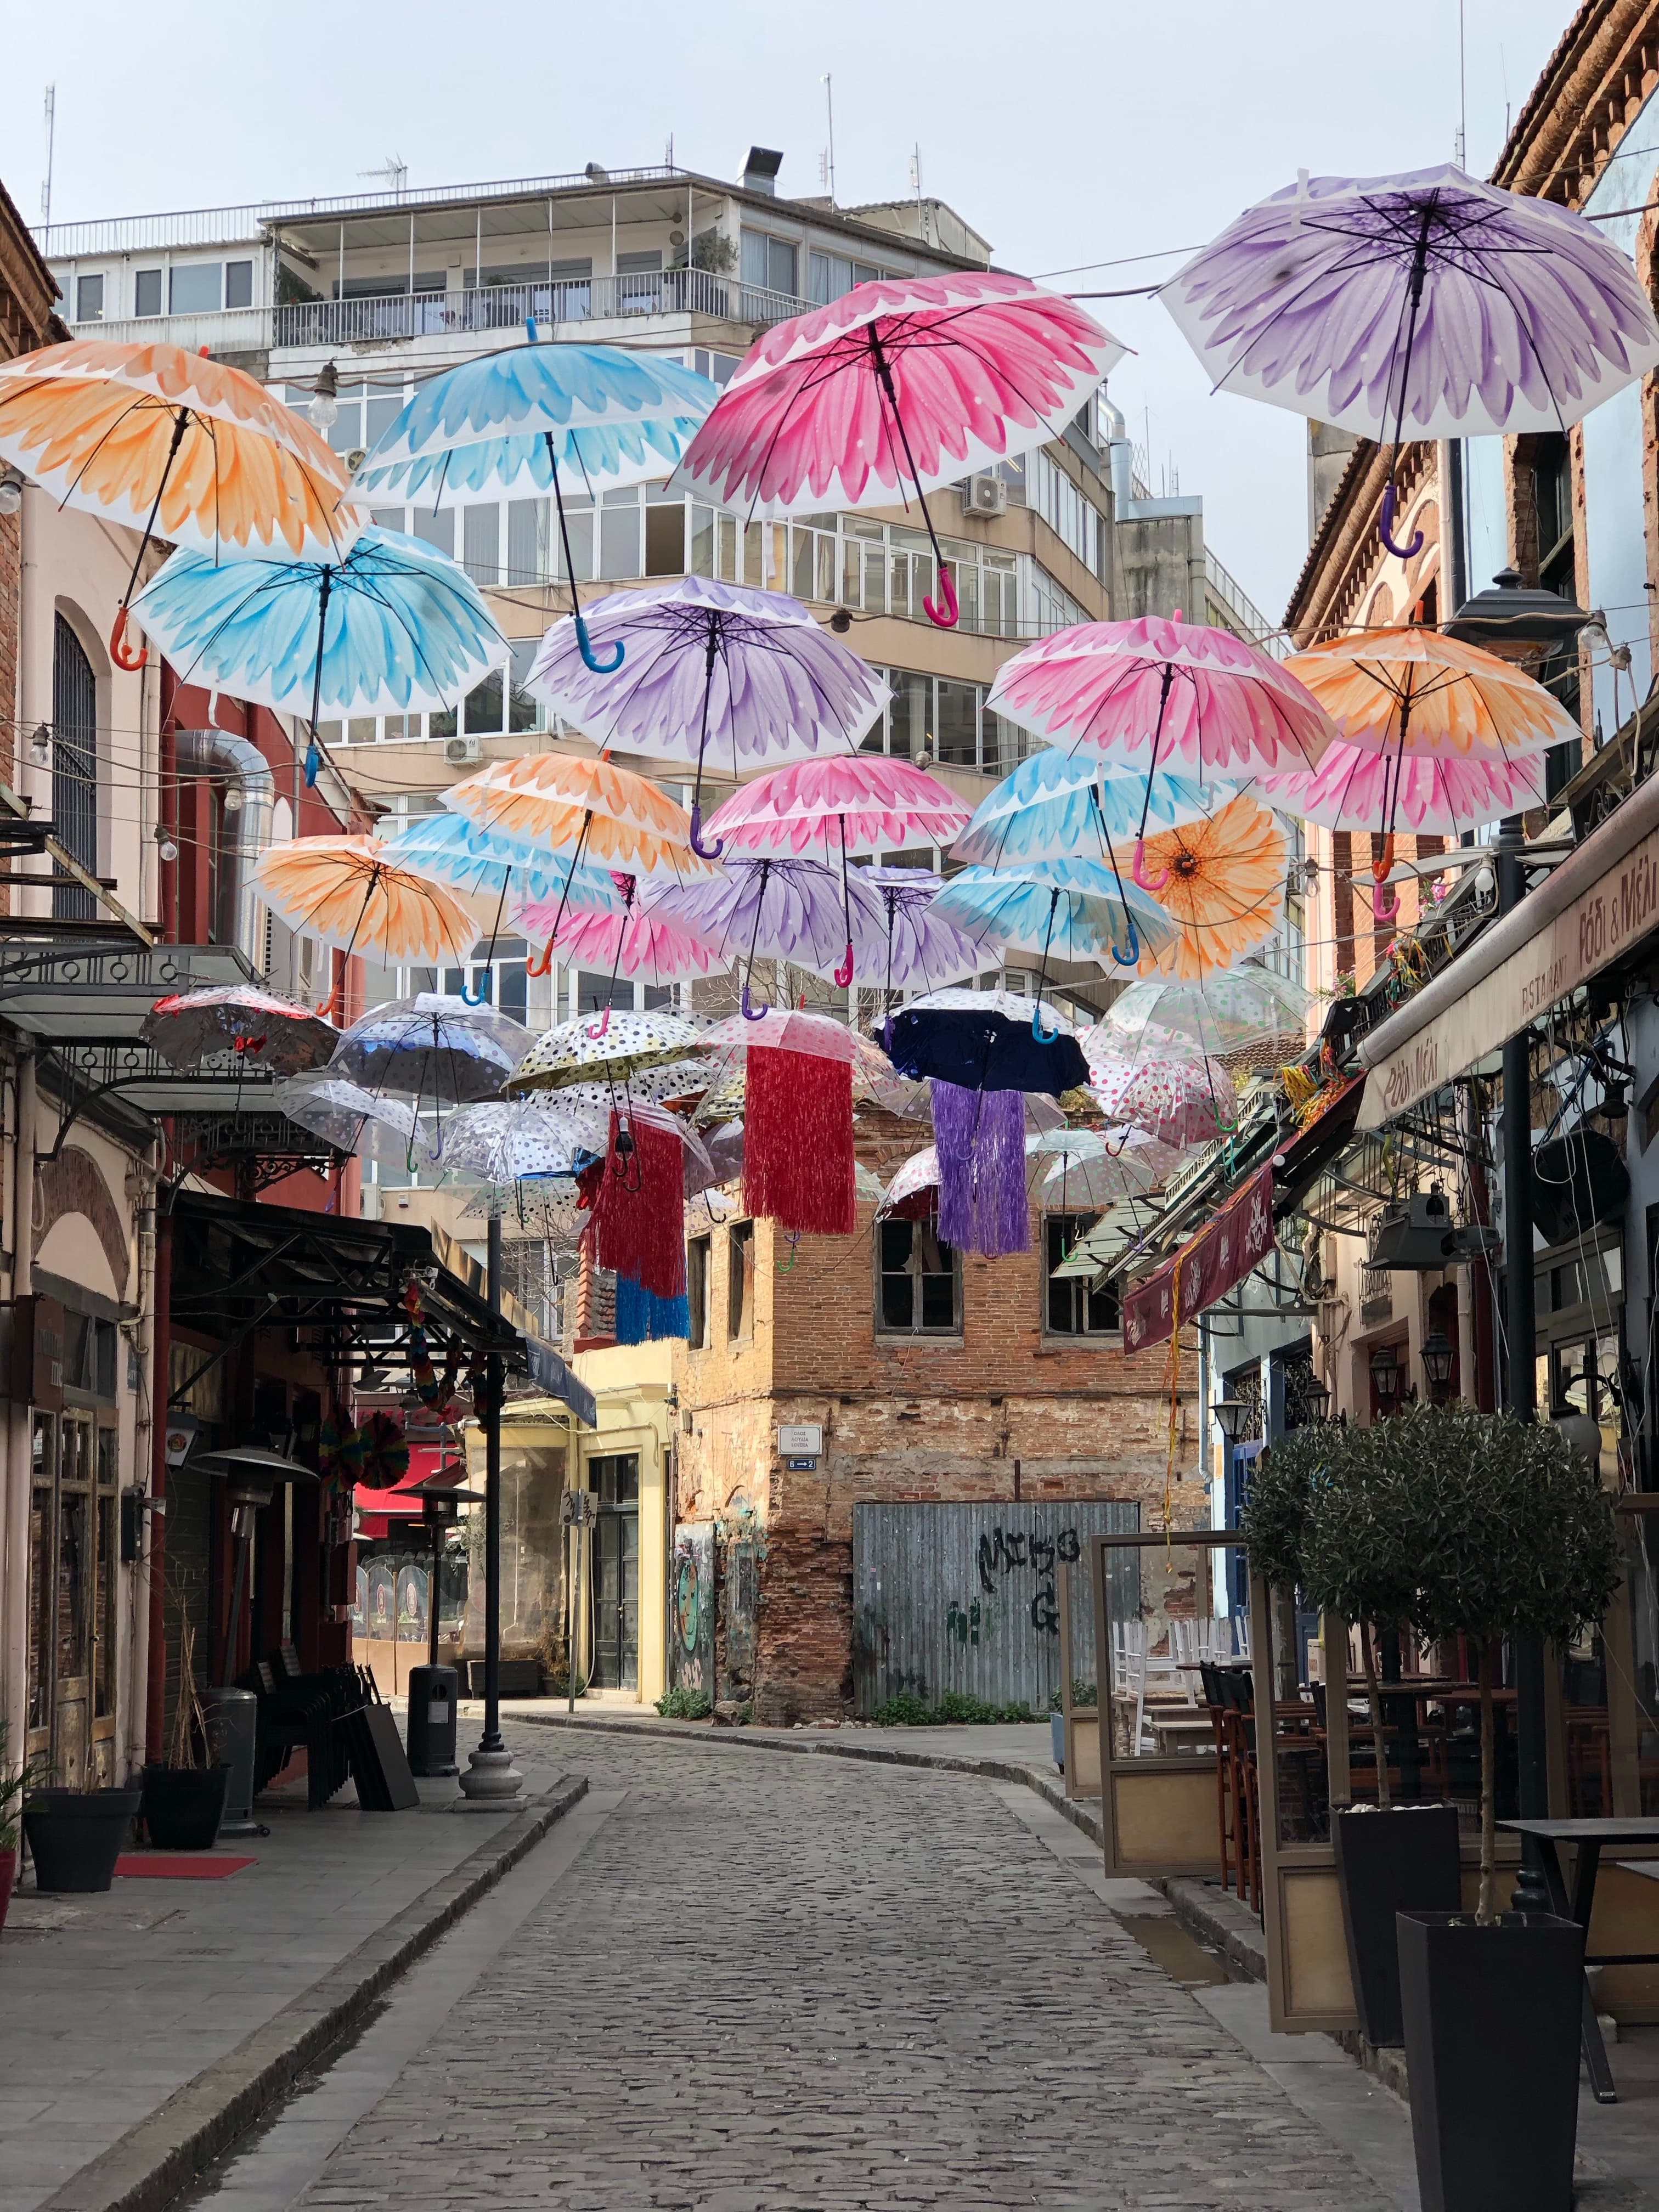 Cobblestone alley with colourful umbrellas hanging overhead